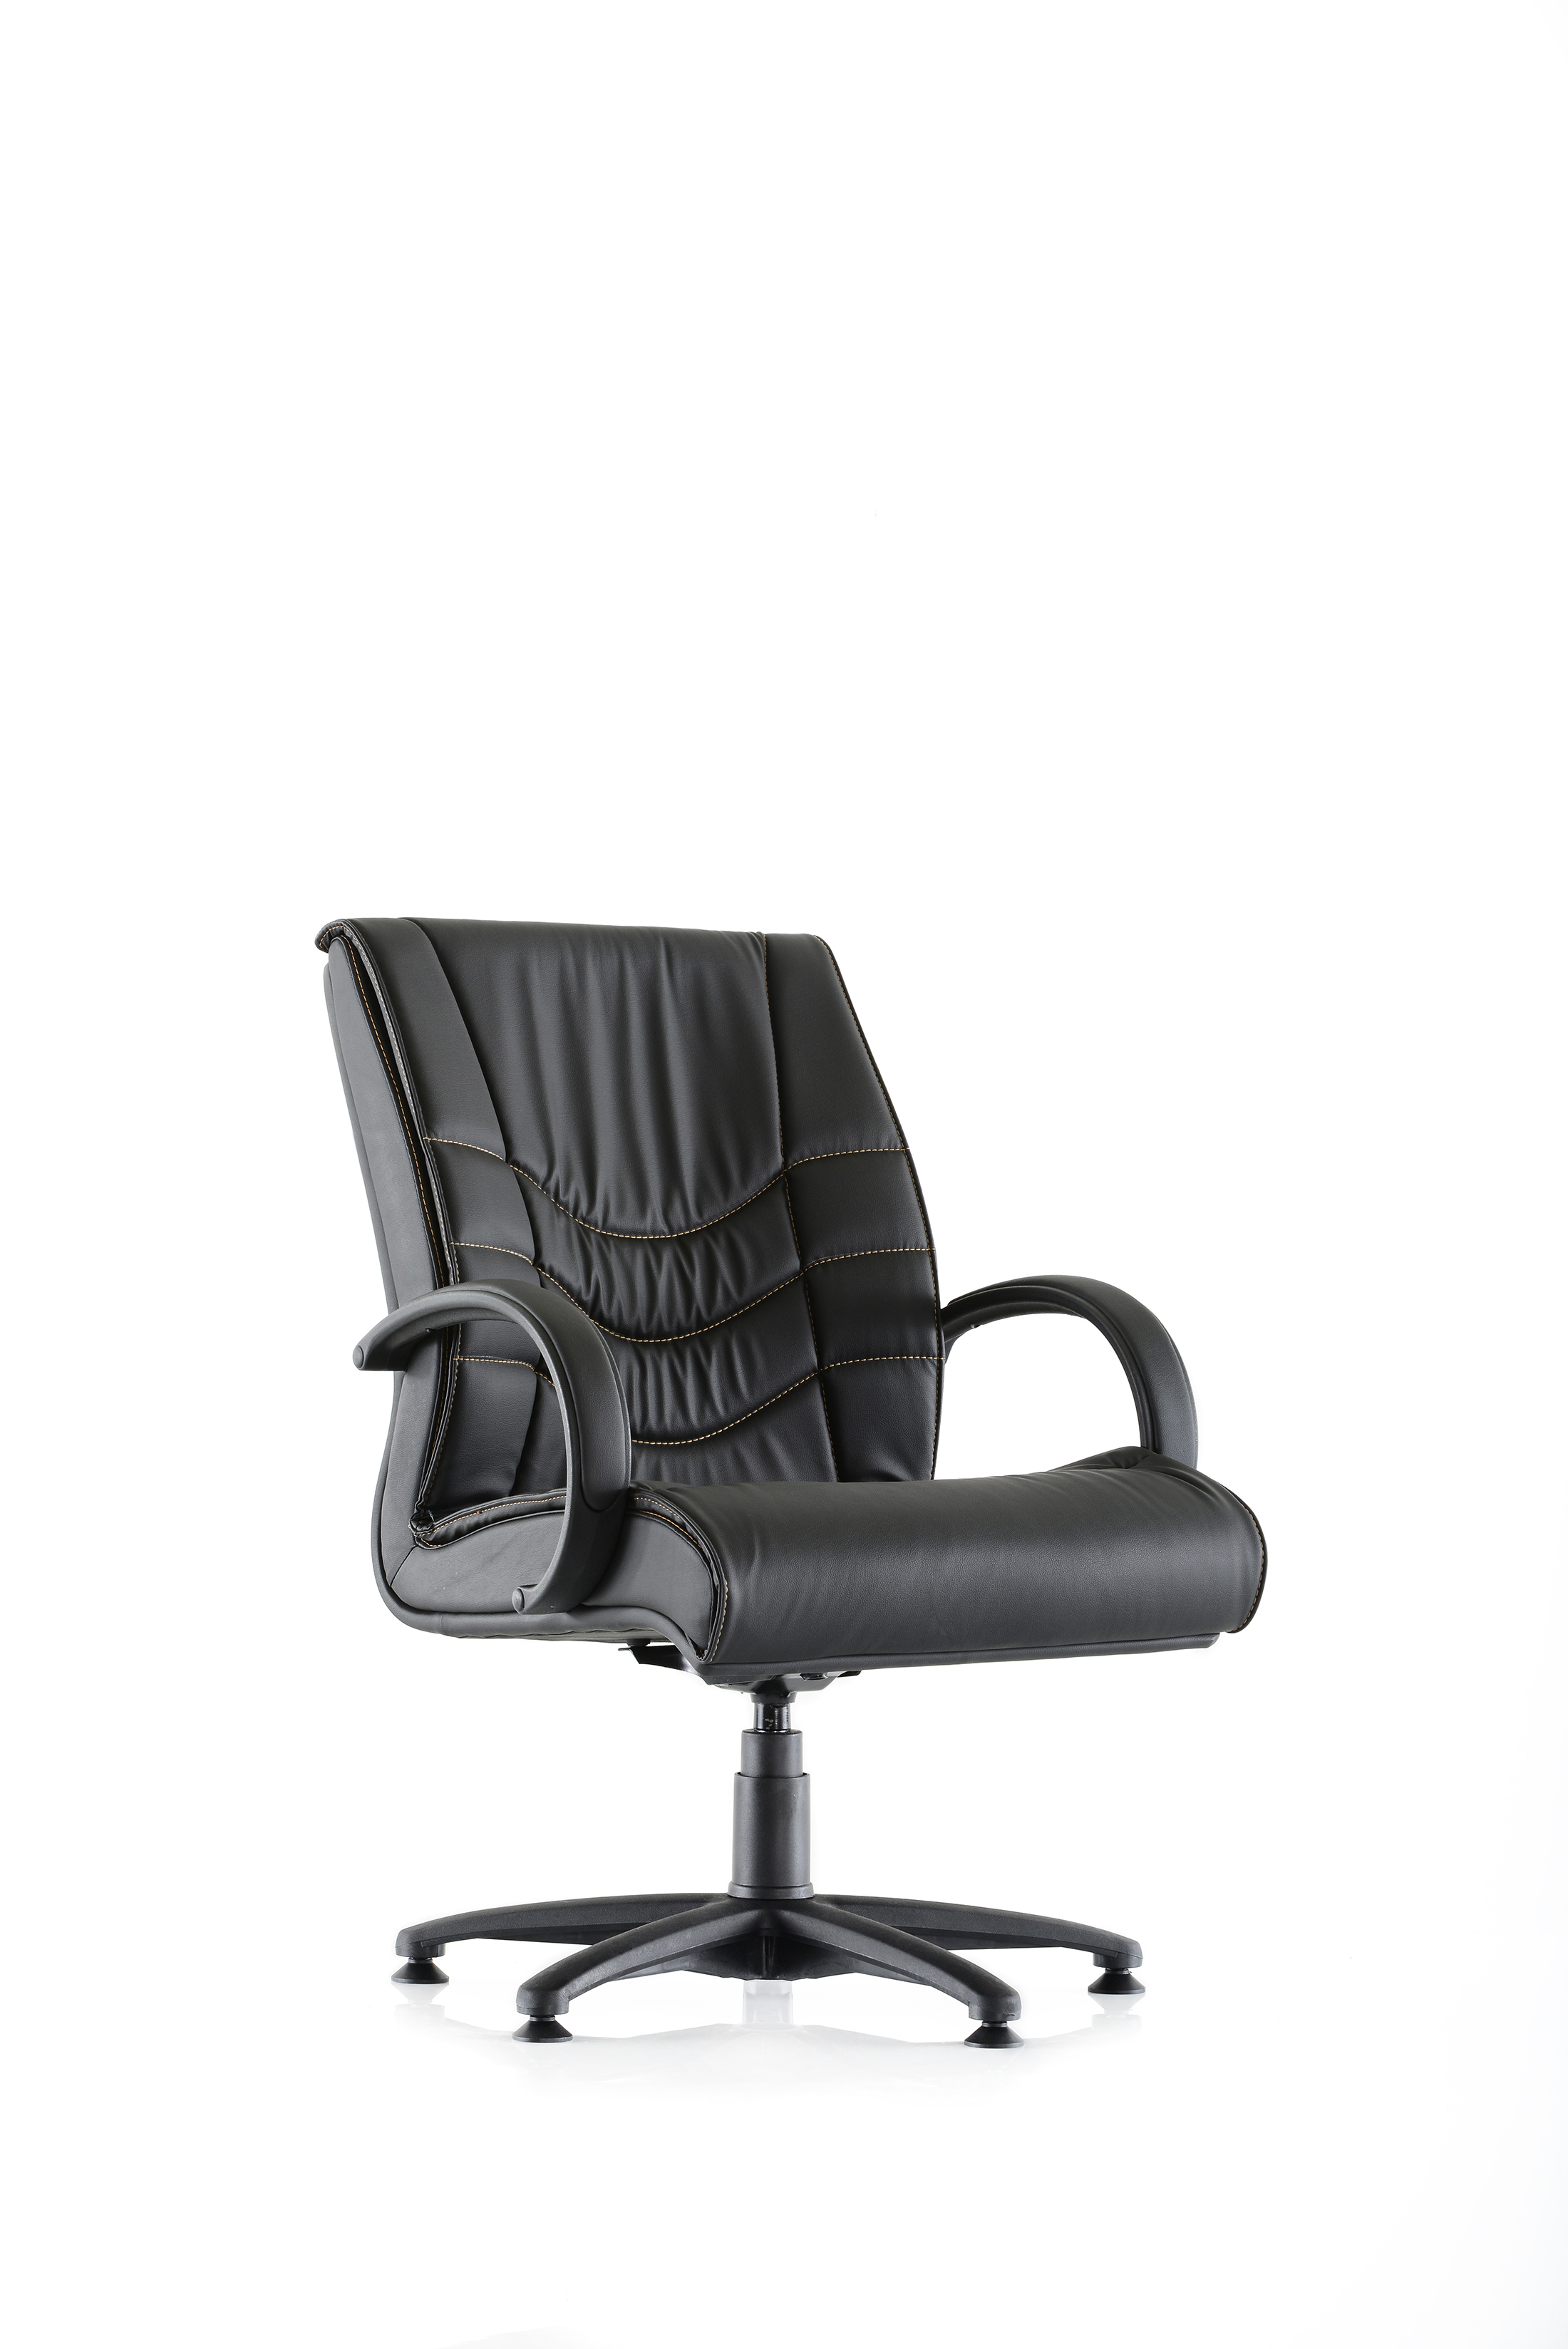 STYLE 200P VISITOR CHAIR